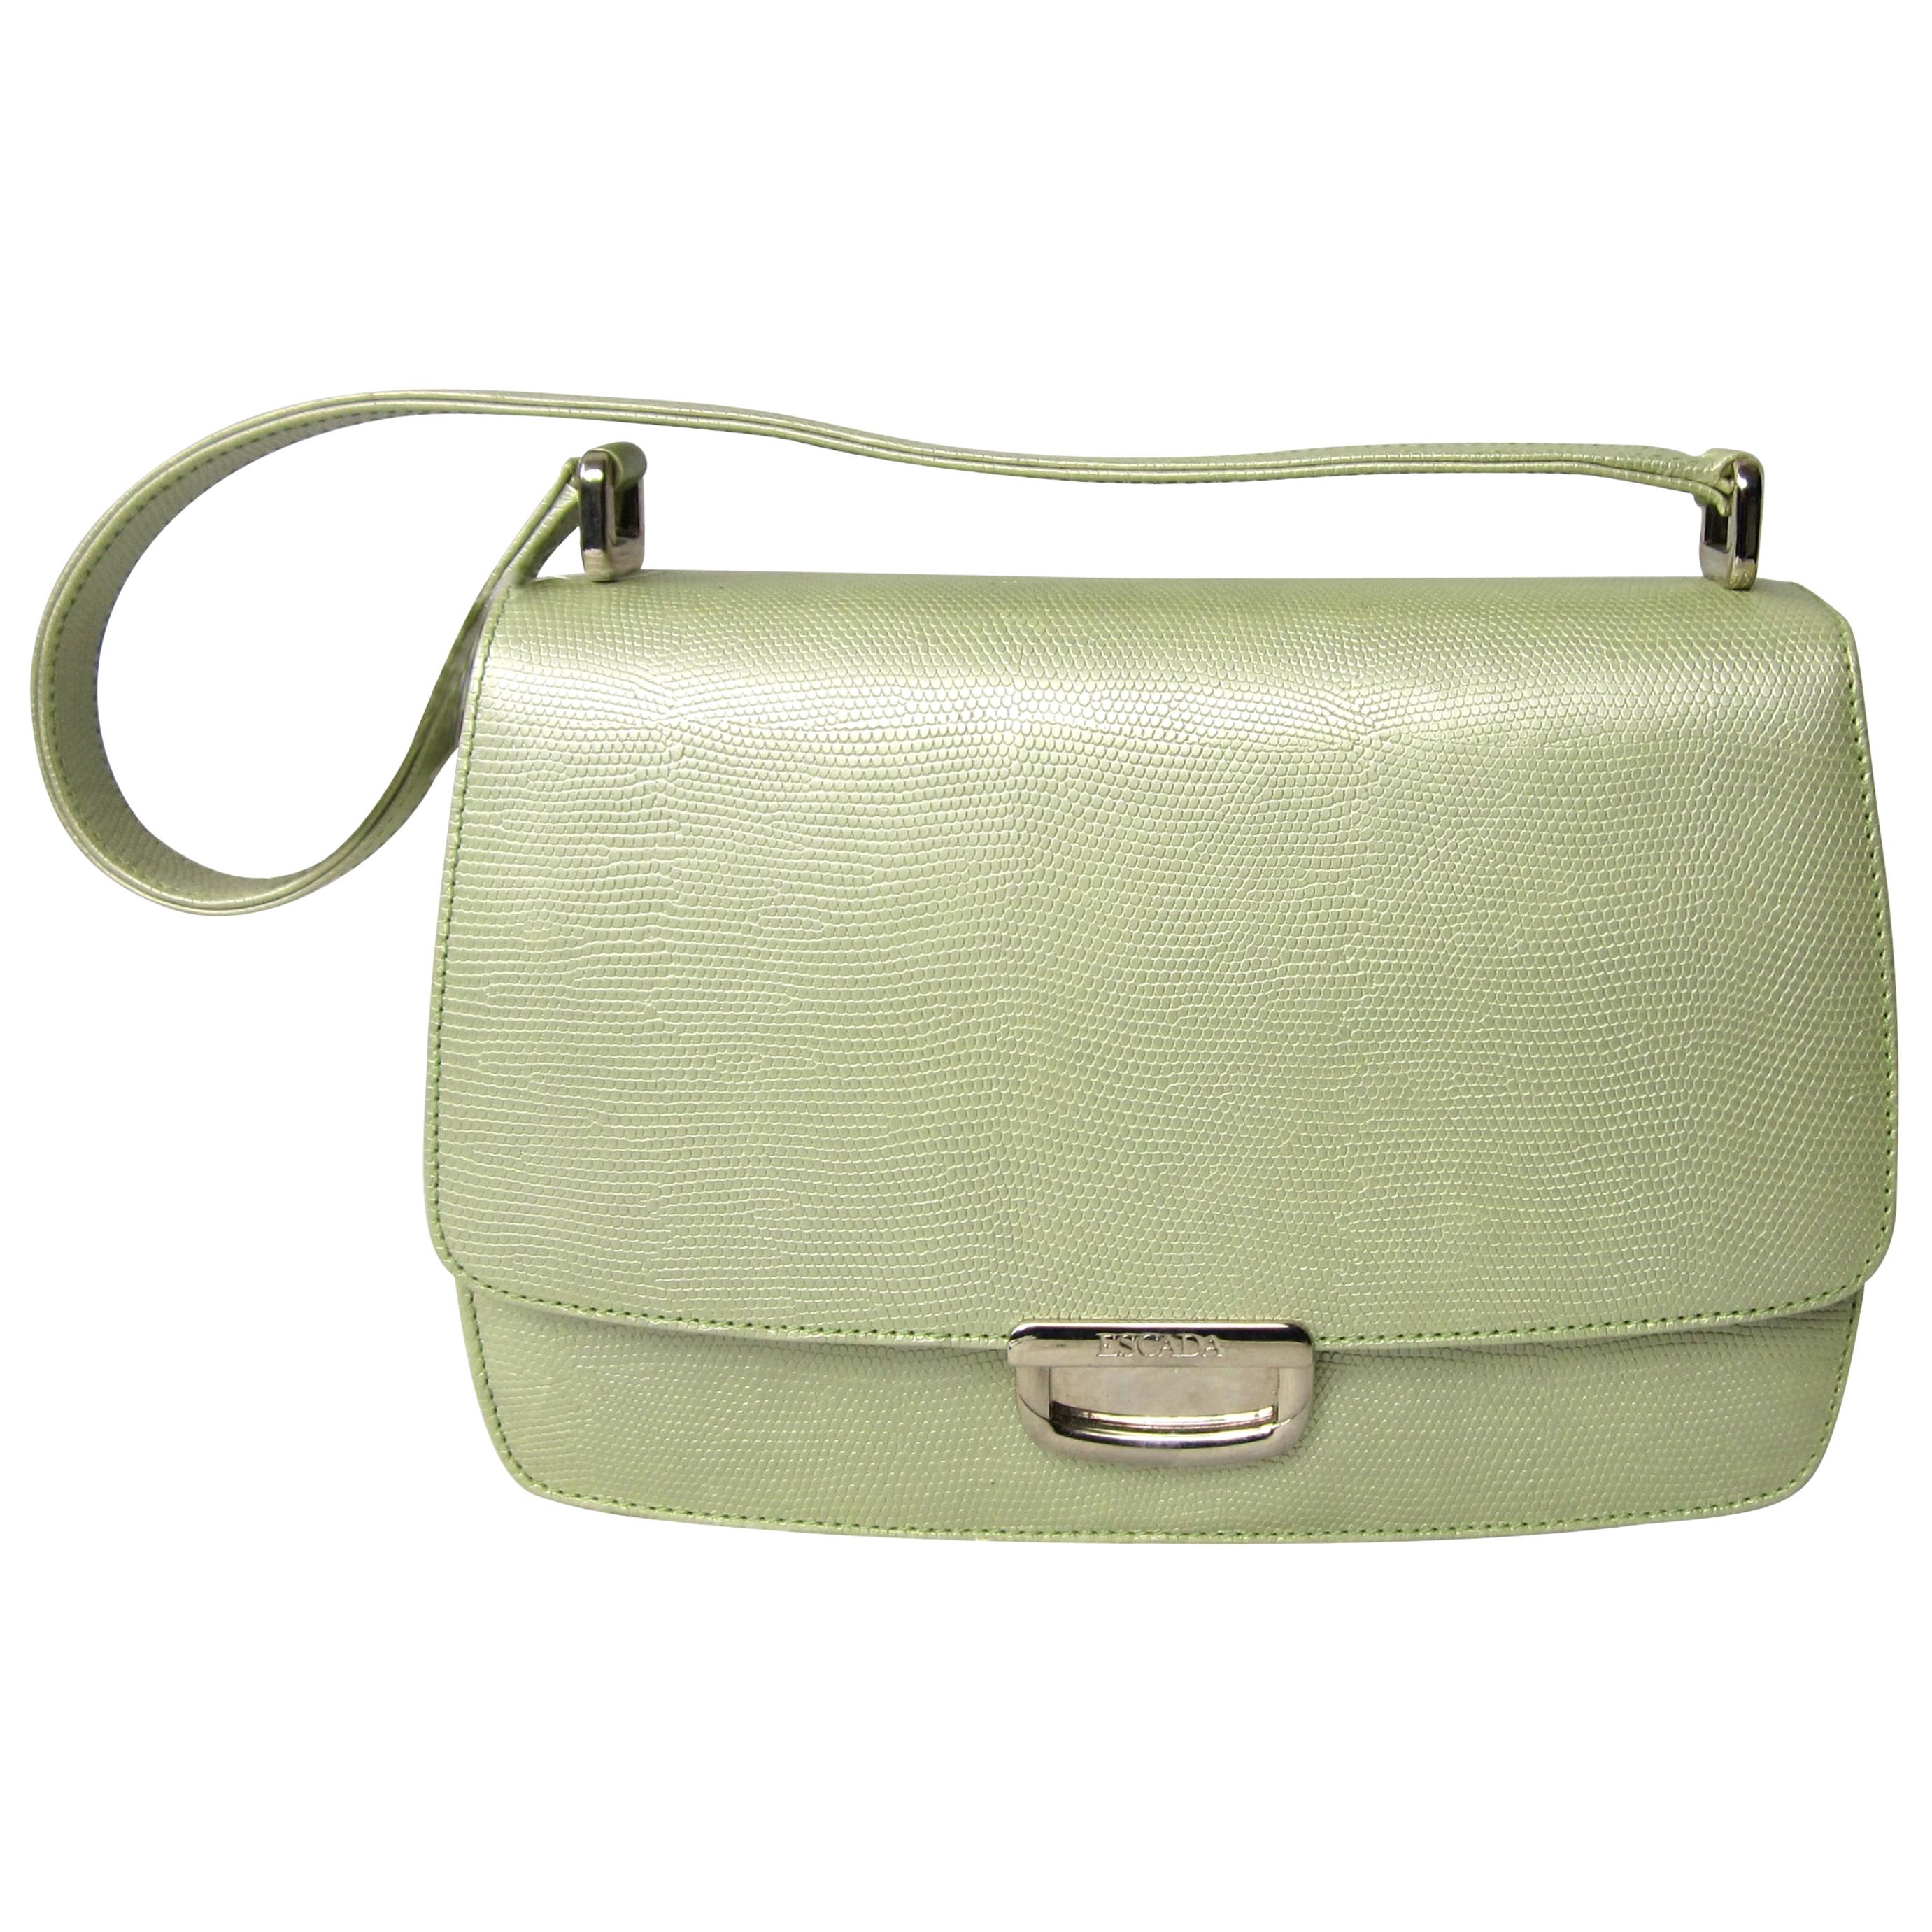 ESCADA Handbag Pearl Lime Green Reptile Embossed Leather 1980's New Never Used